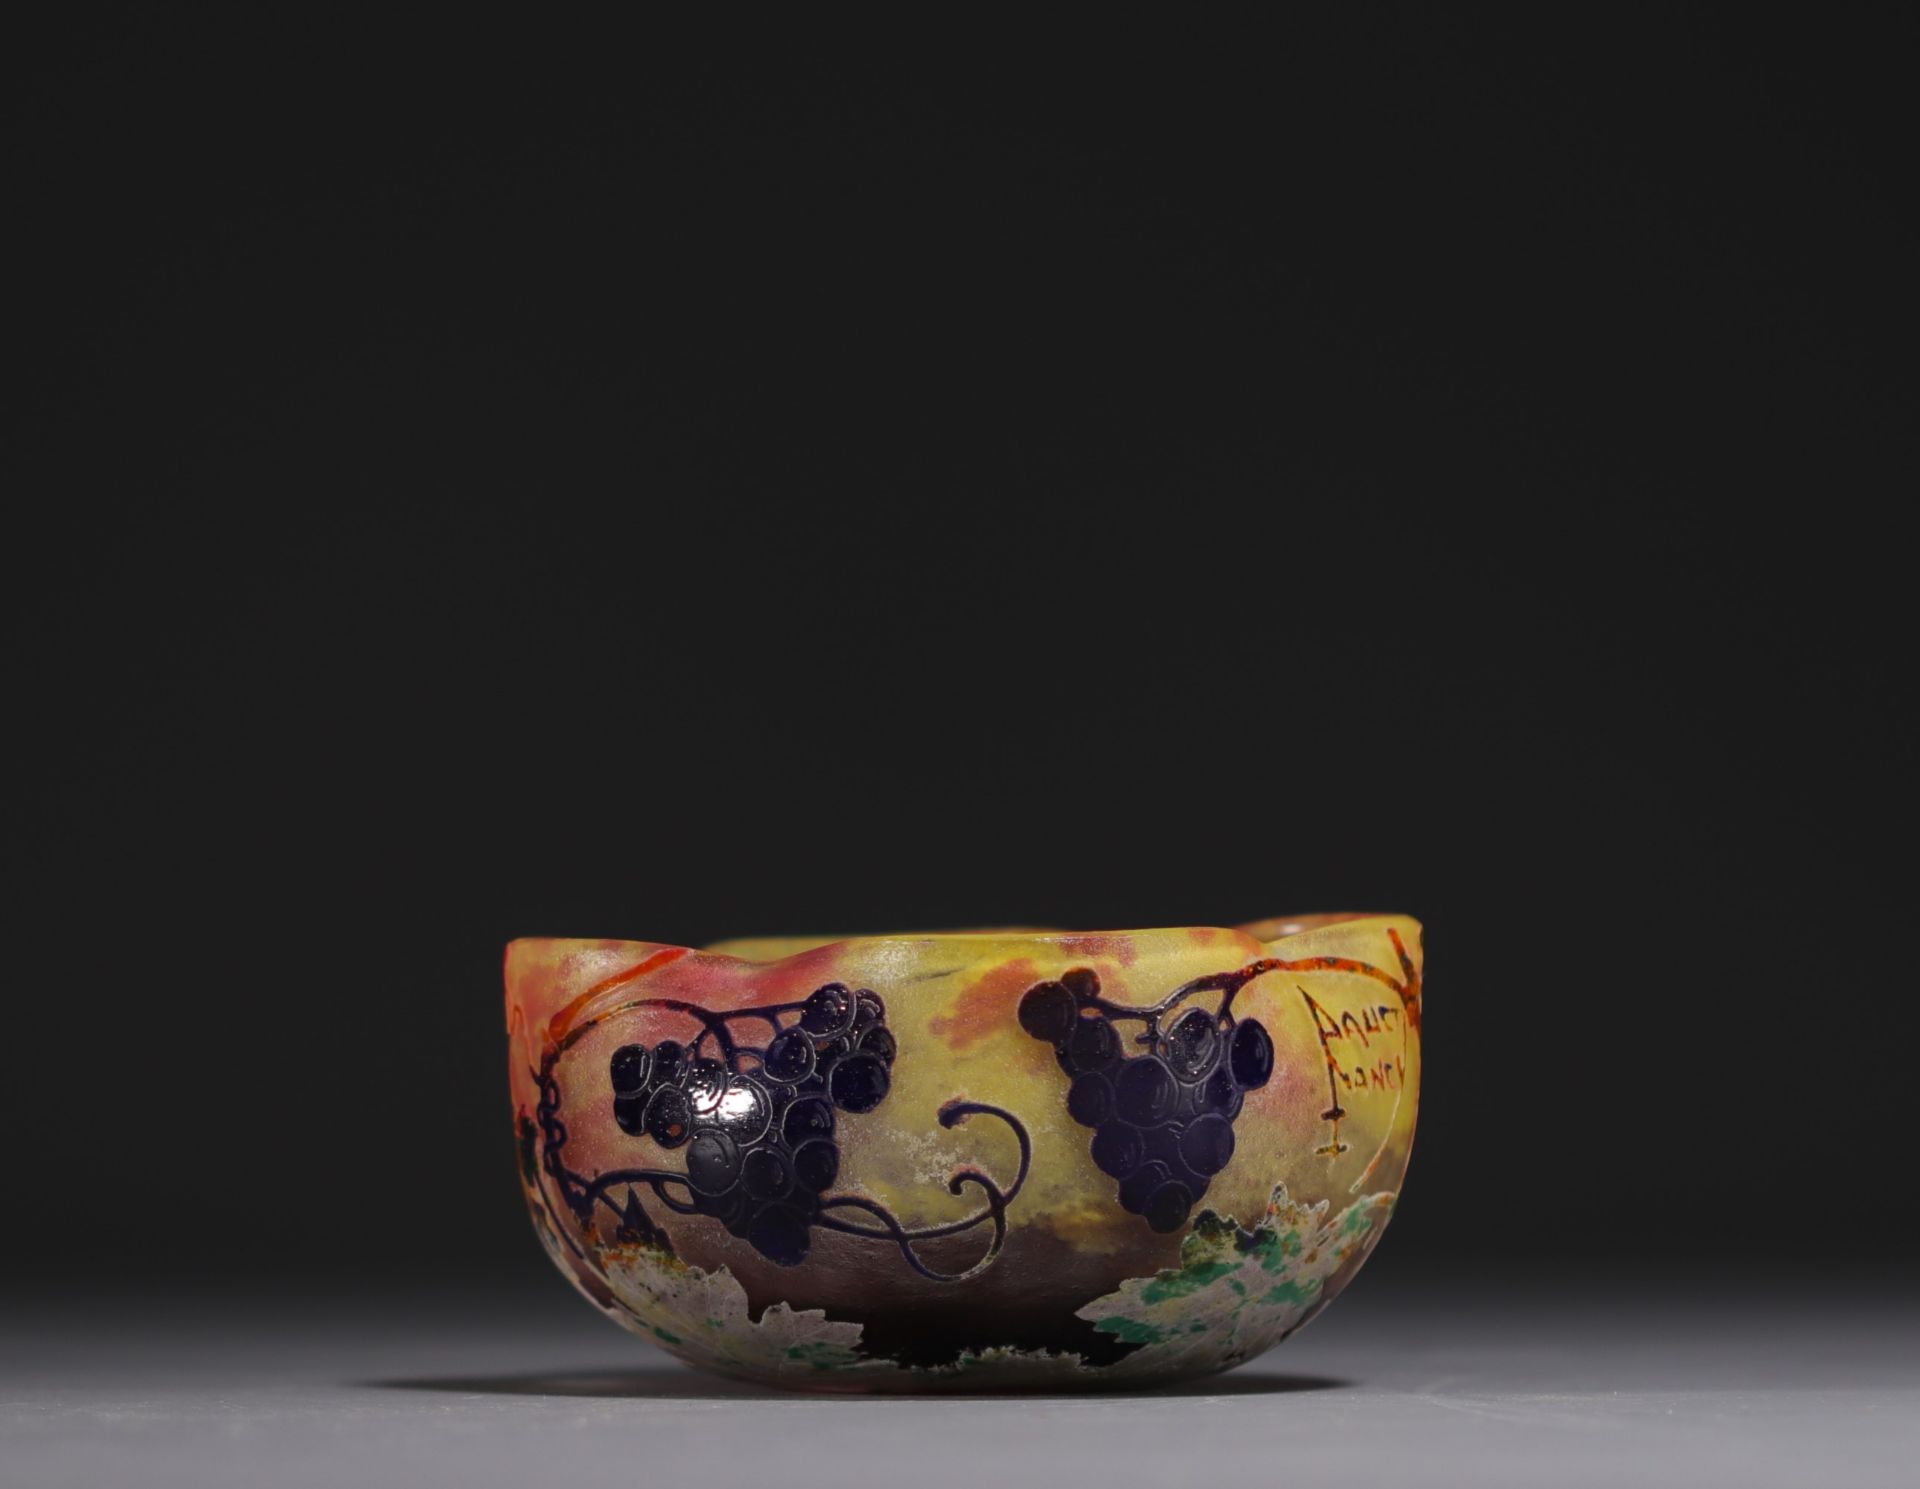 DAUM Nancy - Four-lobed bowl in acid-etched multi-layered glass decorated with bunches of grapes, si - Image 3 of 4